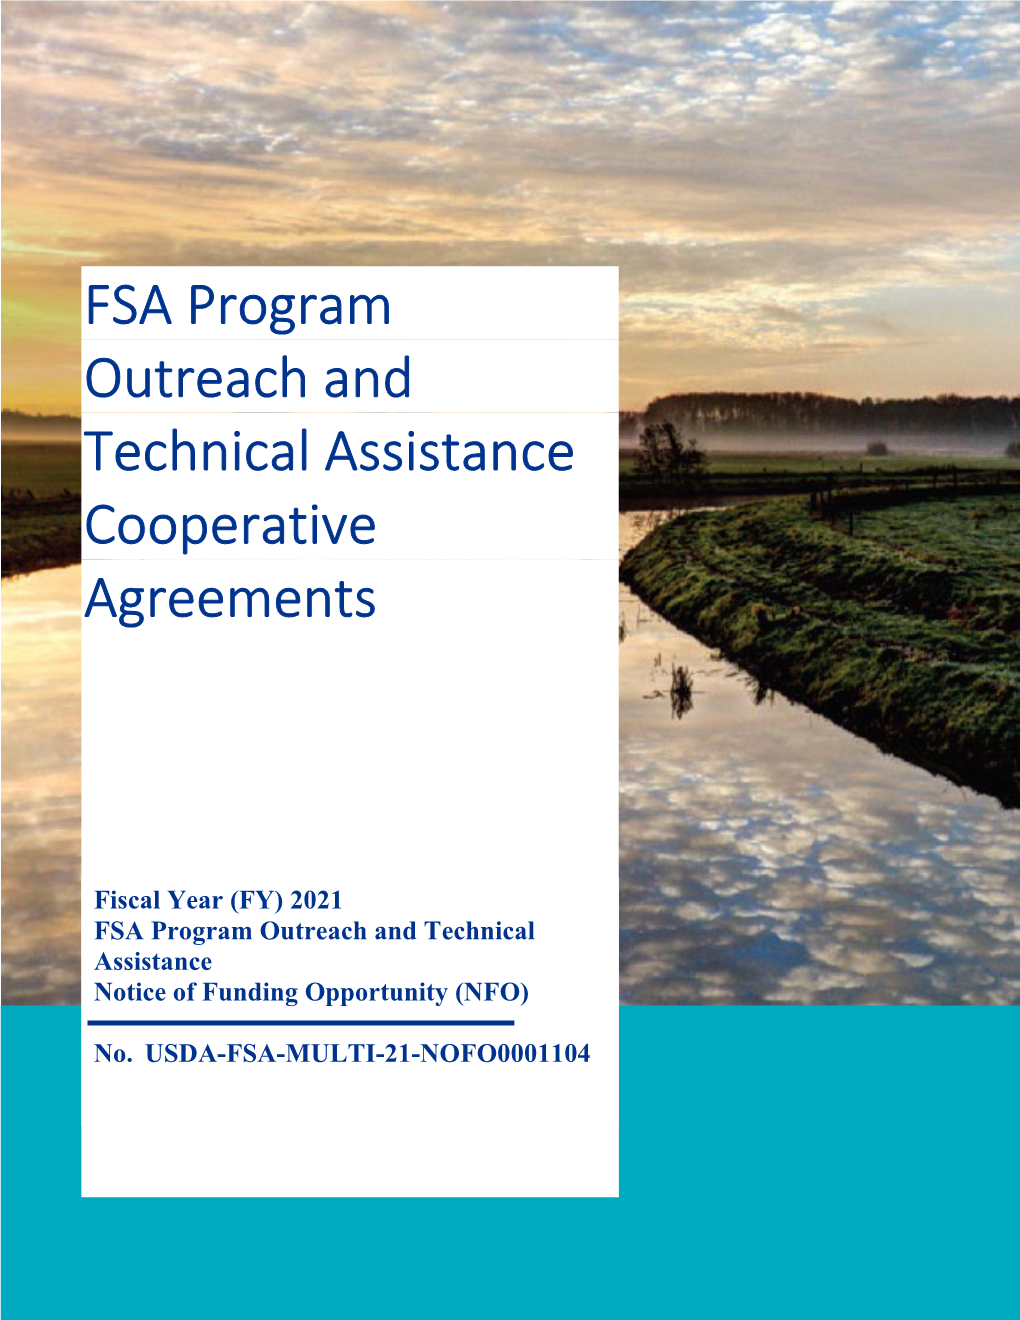 FSA Program Outreach and Technical Assistance Cooperative Agreements